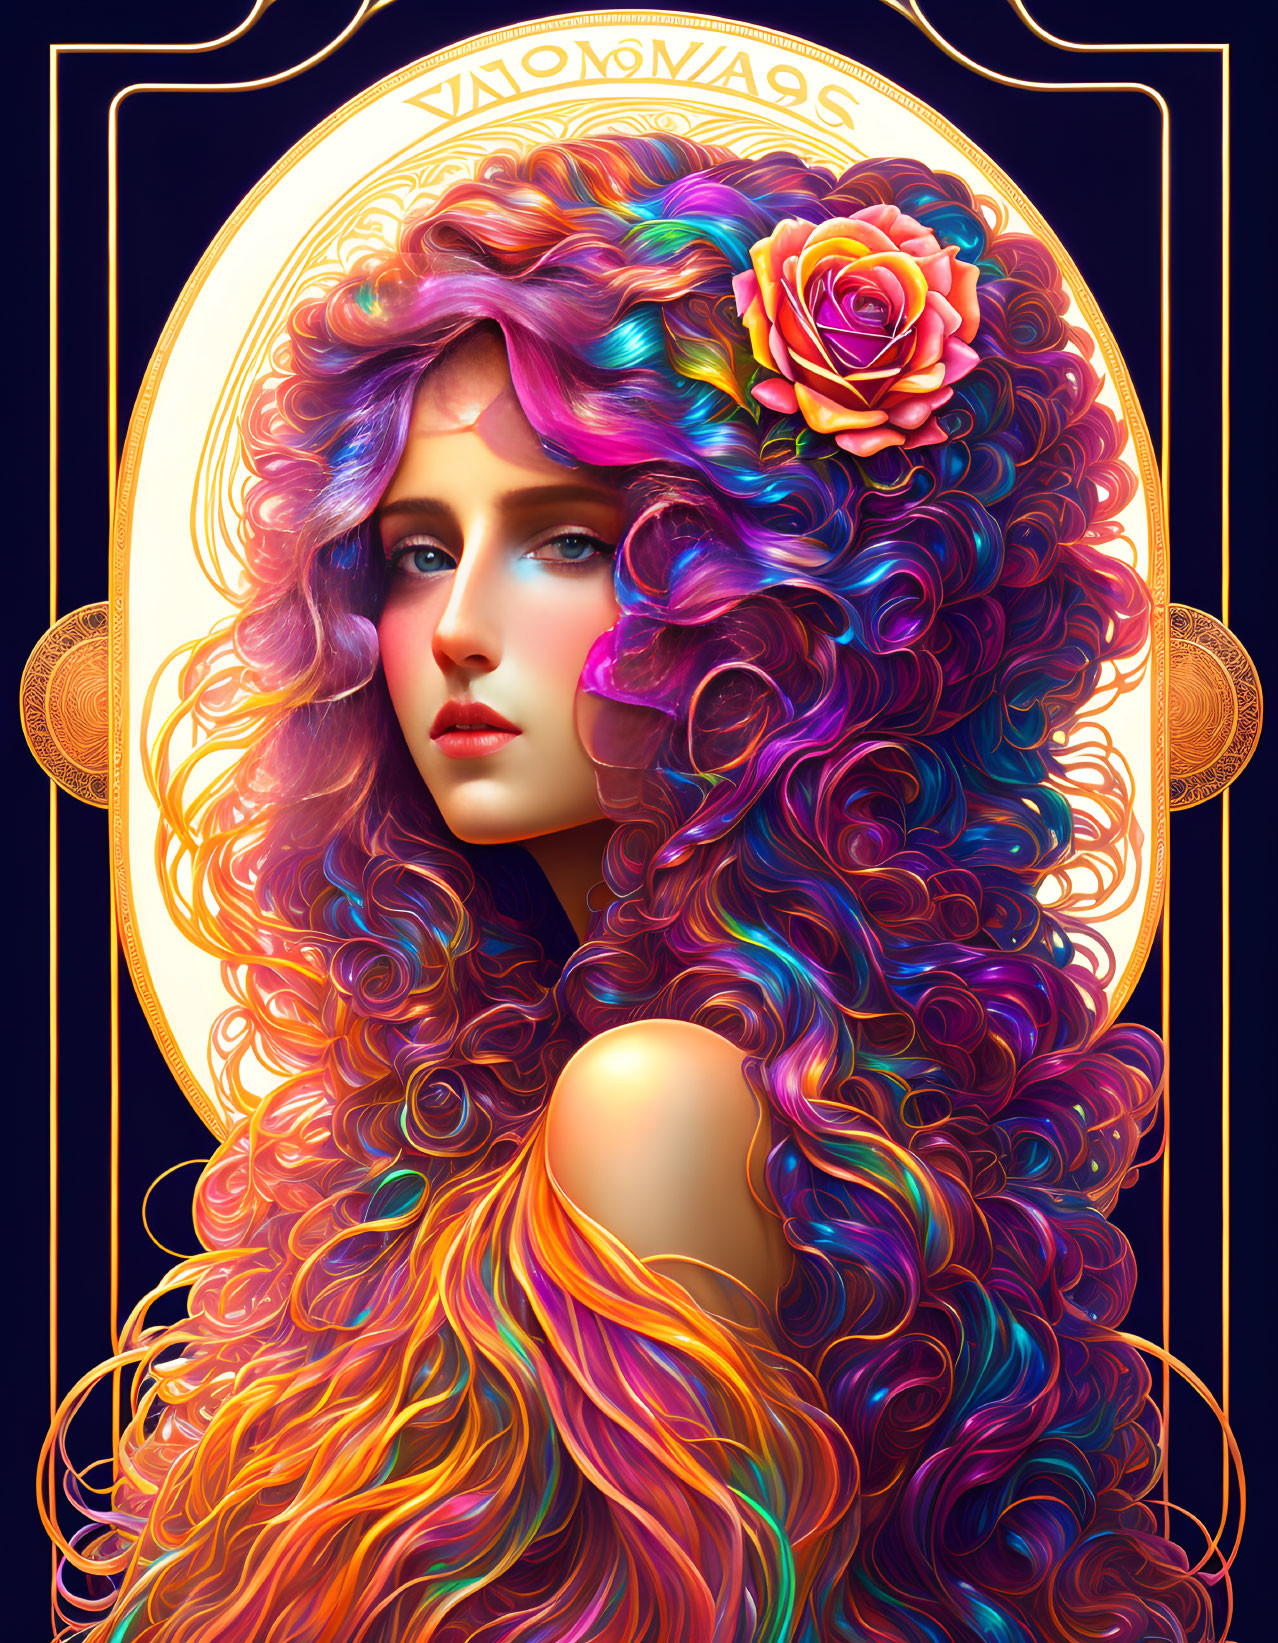 Digital Artwork: Woman with Vibrant Multicolored Hair and Rose in Art Nouveau Frame